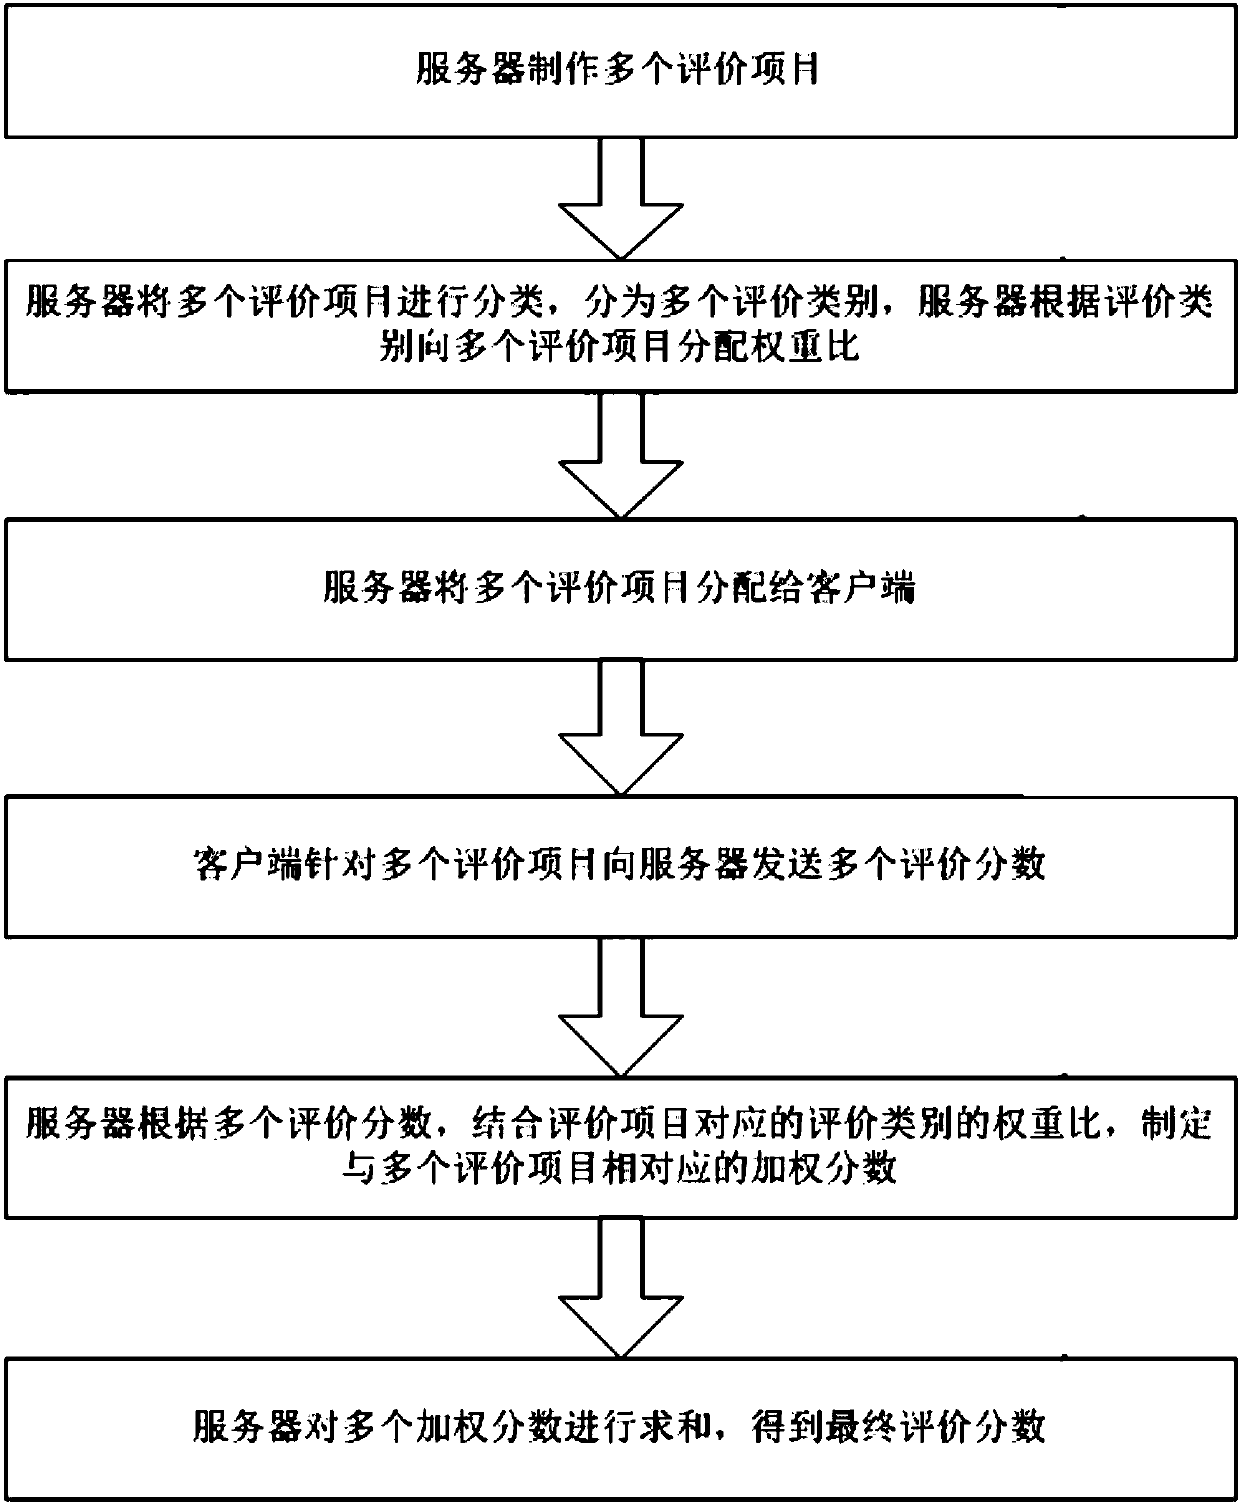 Dynamic weighted comprehensive assessment method-based safety assessment method